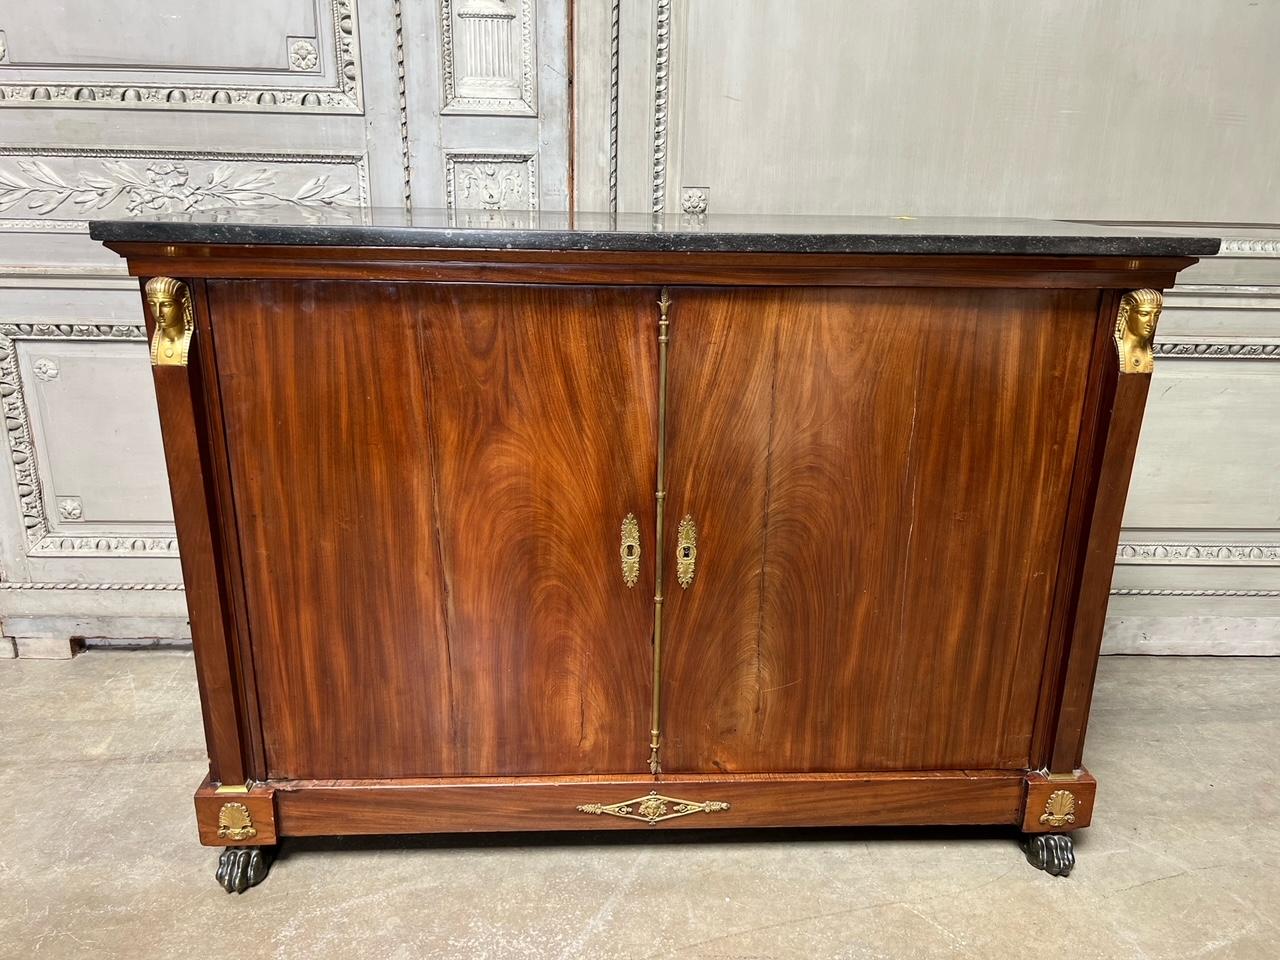 A period French Empire mahogany buffet with exceptional bronze mounts and an original stone top. This beautiful cabinet dates from the beginning of the 19th century and is very nice quality. There are some splits in the wood that can be filled, but